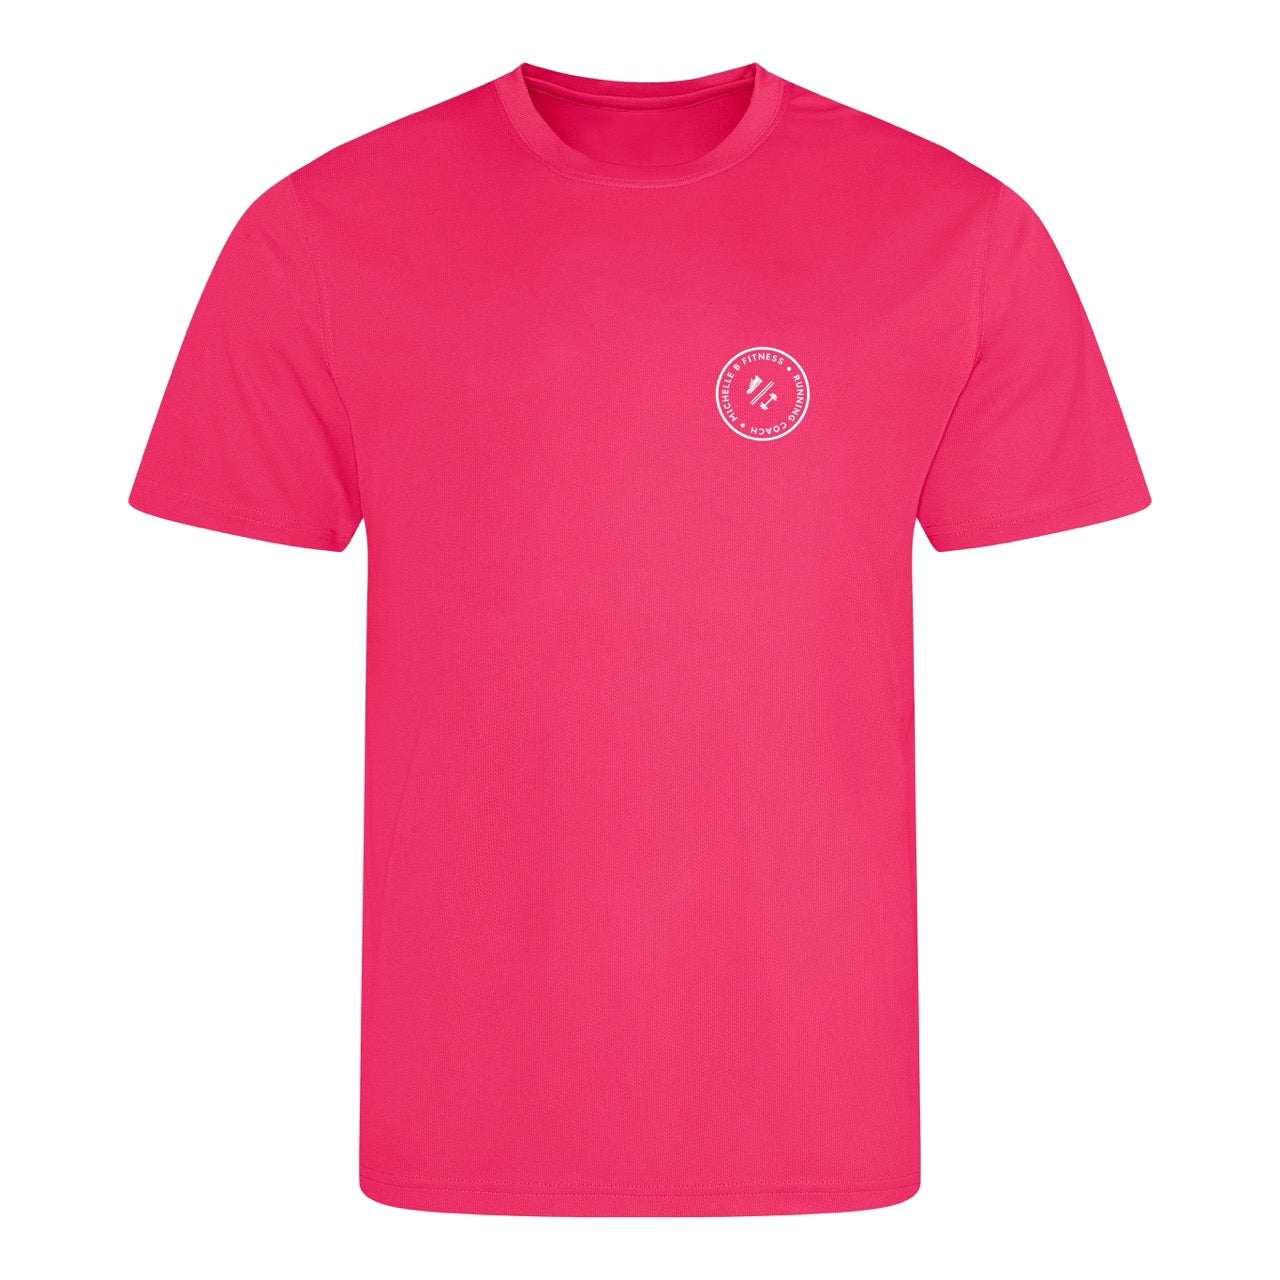 Michelle B Fitness Technical Tee - Hot Pink or Orange